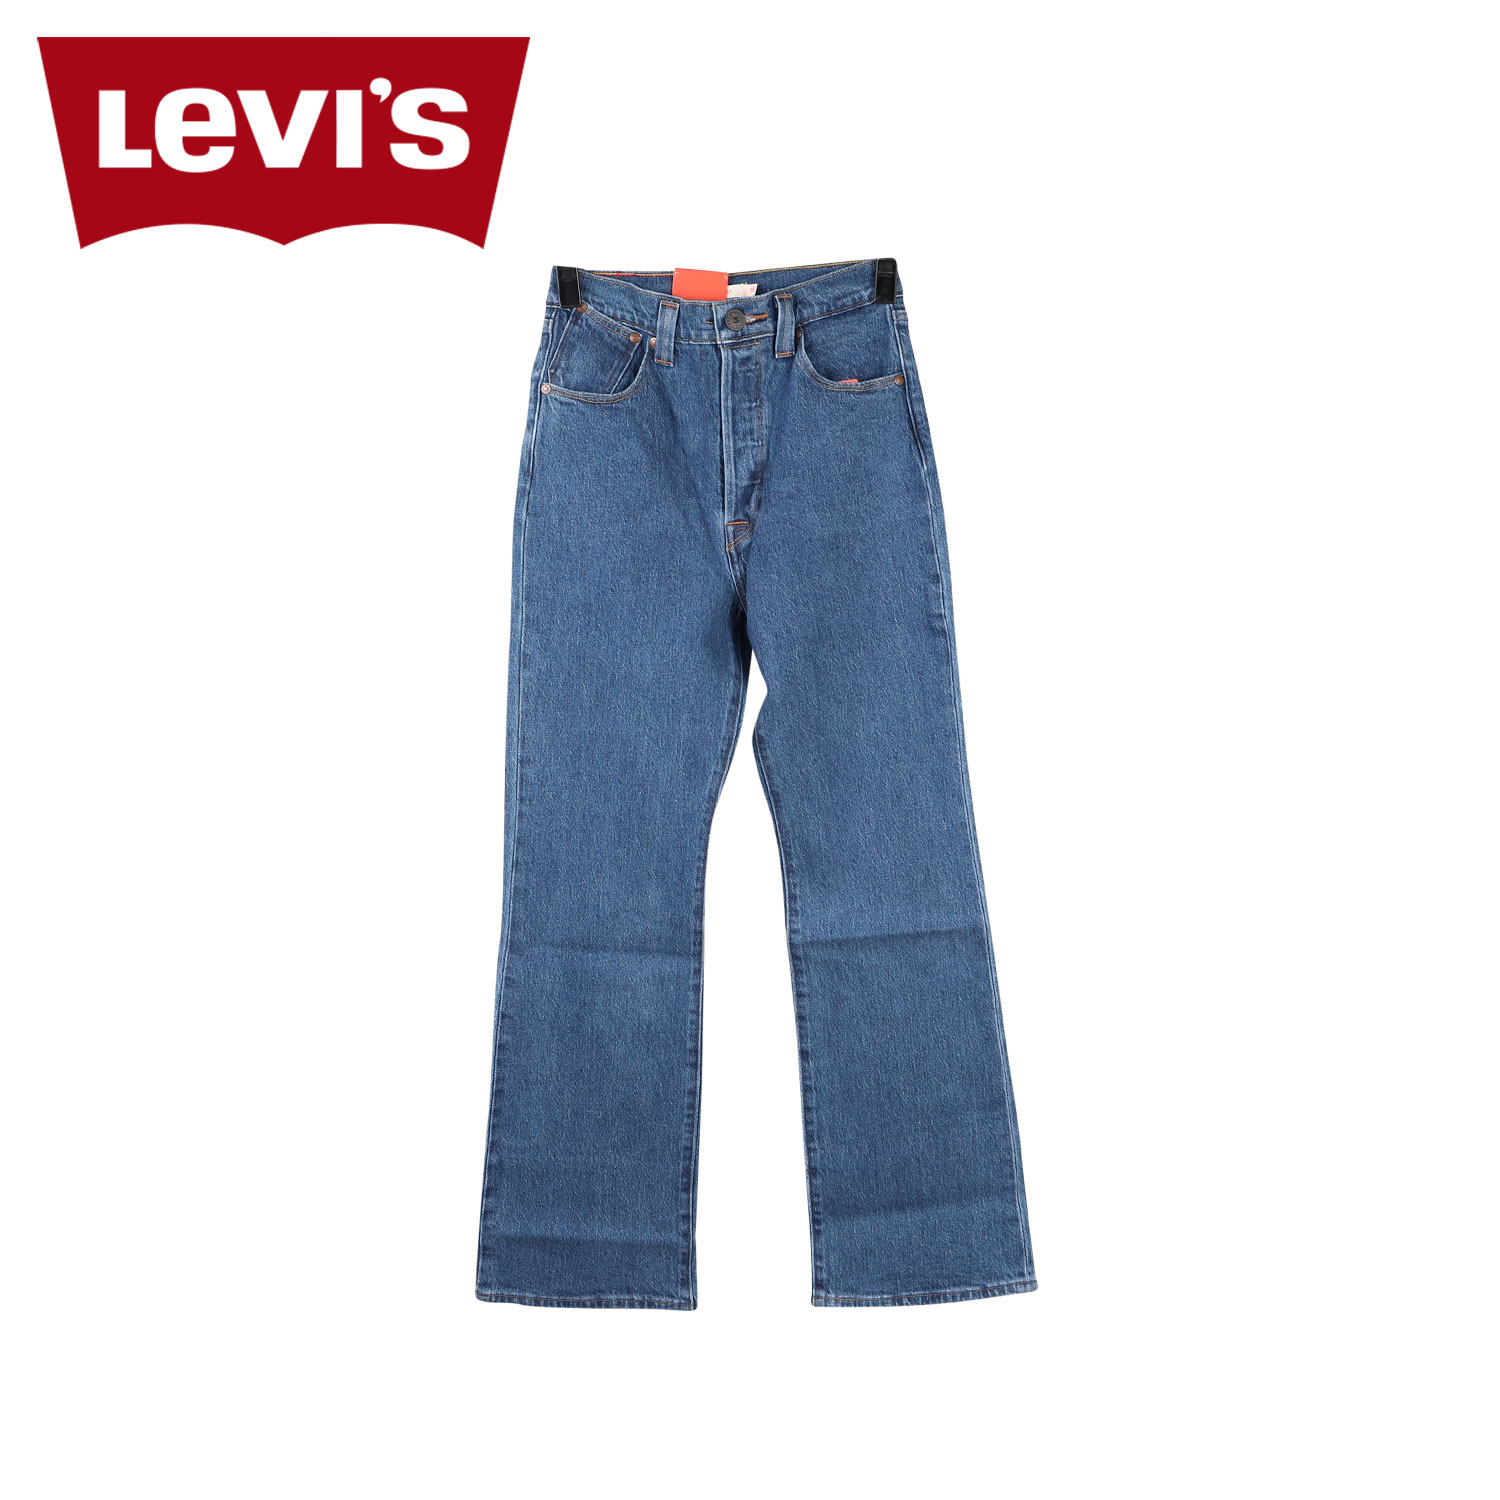 ں1000OFFݥ LEVIS RED ꡼Х å ǥ˥ѥ  ѥ ֥ ֡ ǥ RIBCAGE BOOT ֥롼 A2680-0000